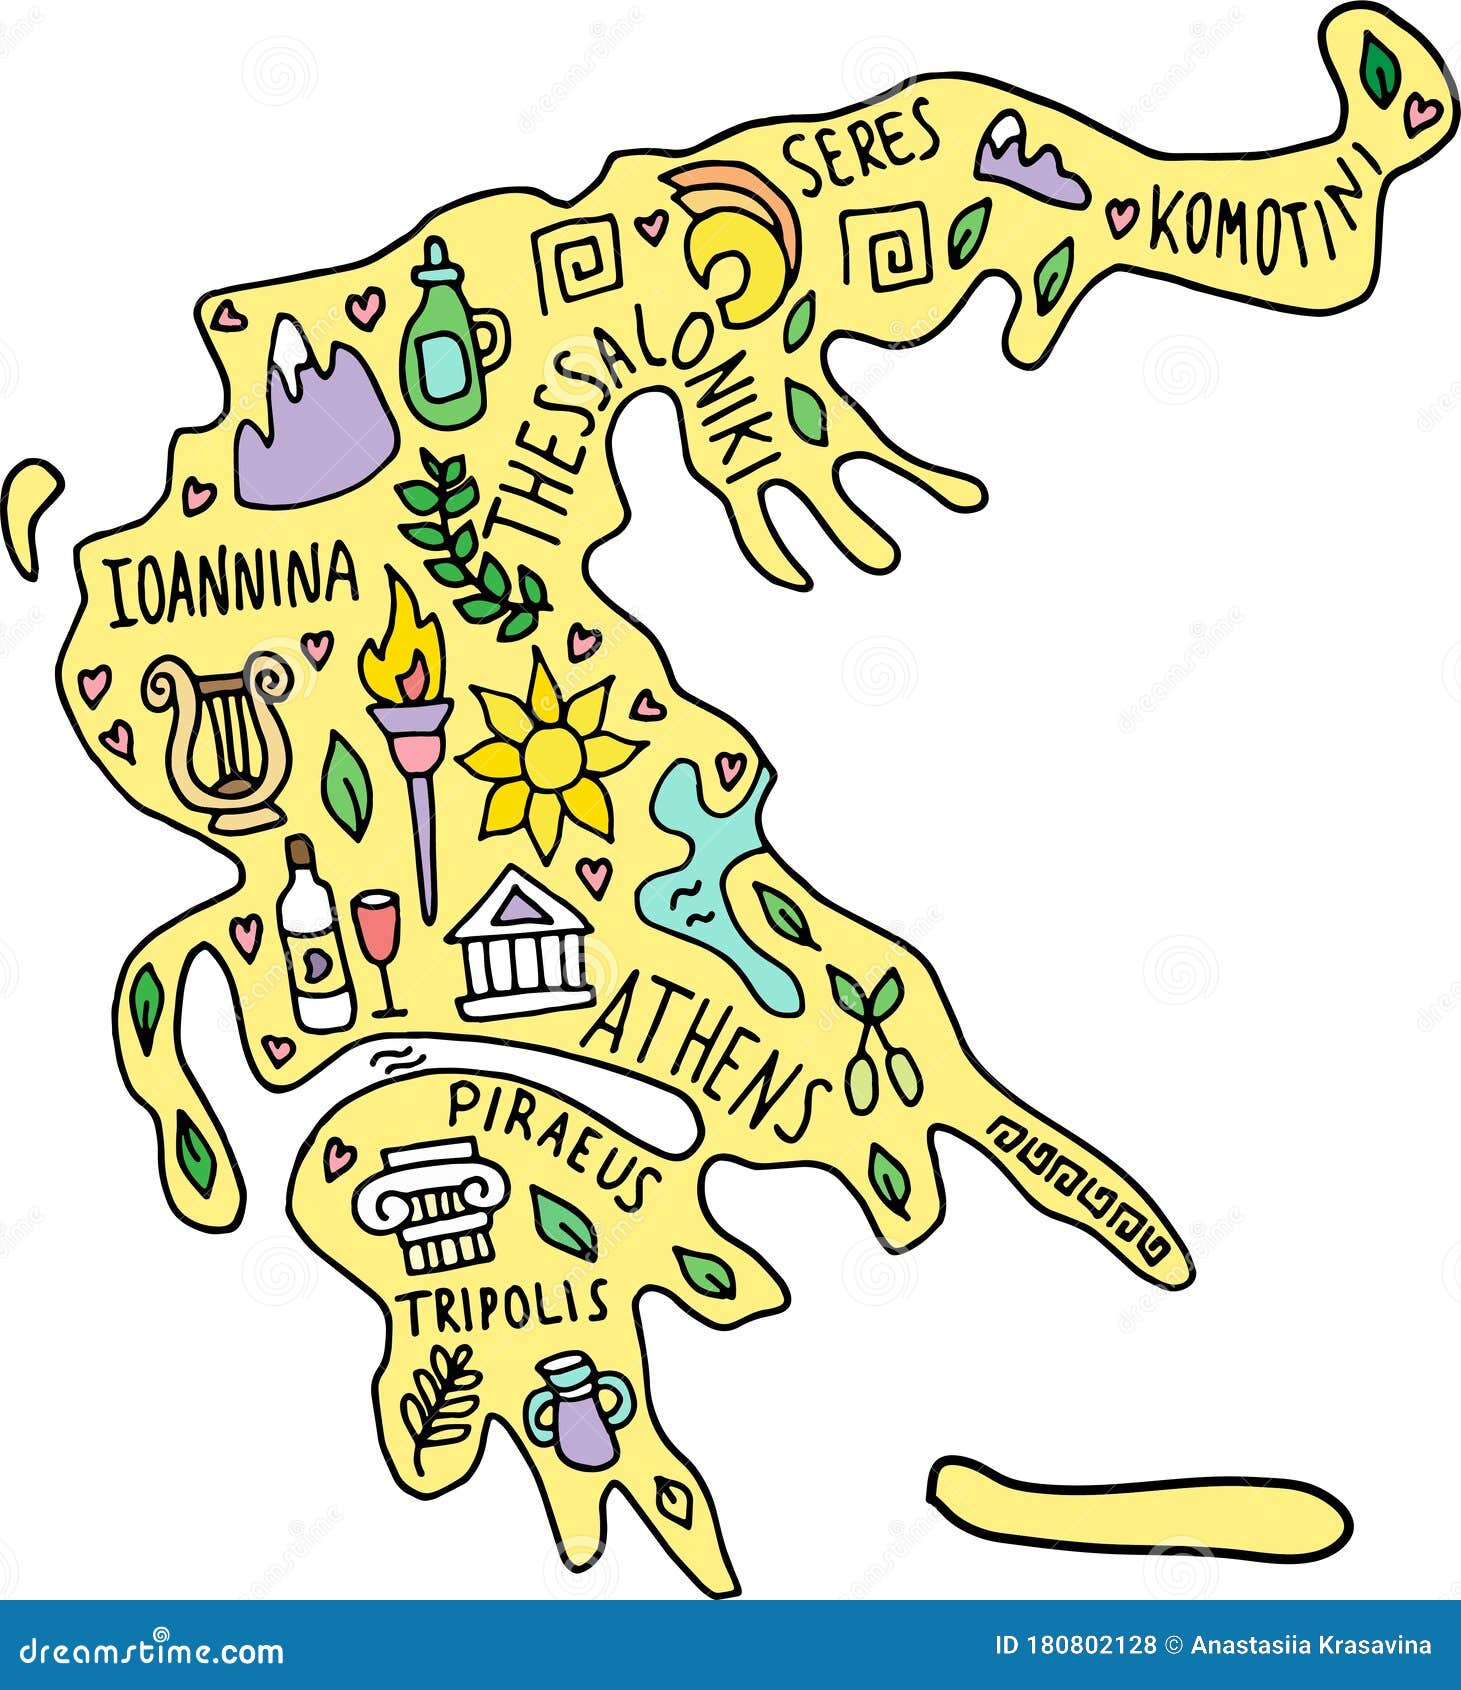 Hand Drawn Colored Doodle Greece Map. Greek City Names Lettering and  Cartoon Stock Illustration - Illustration of amphora, icons: 180802128